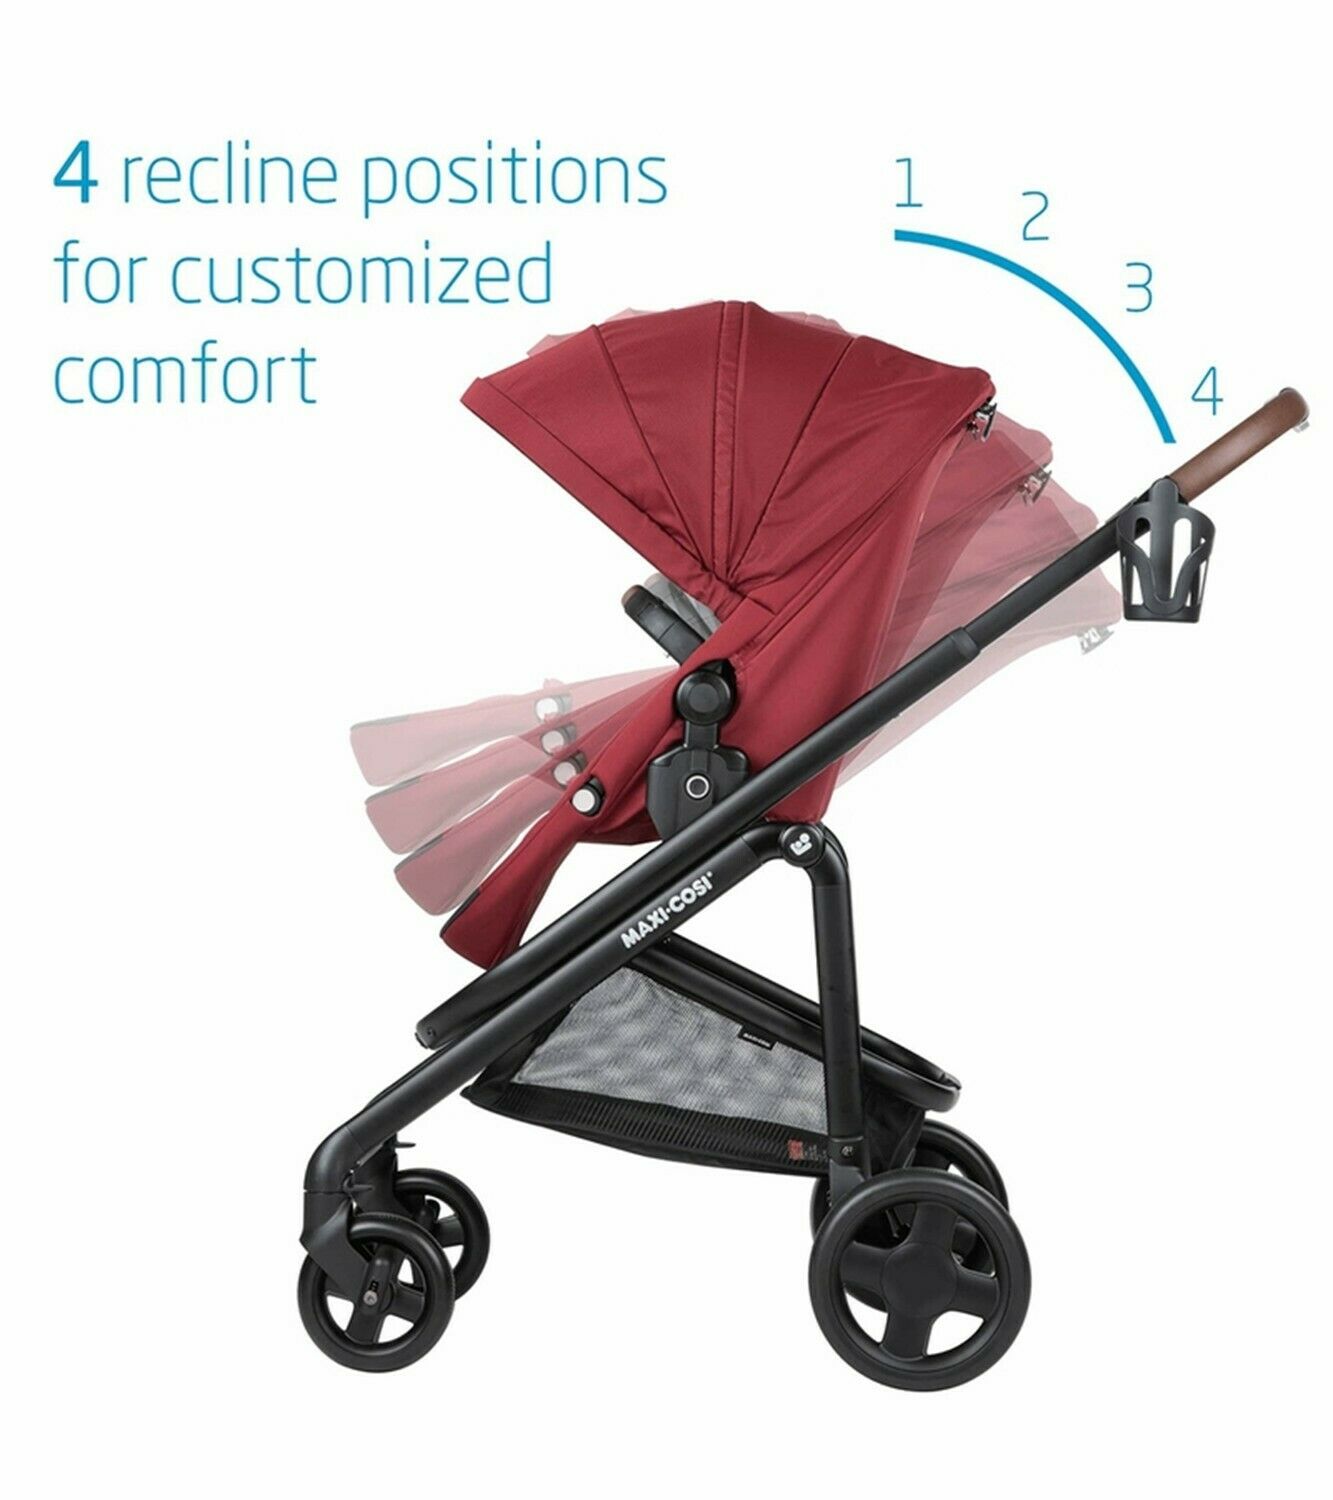 Maxi Cosi XP Baby Travel System with Car Seat - Red